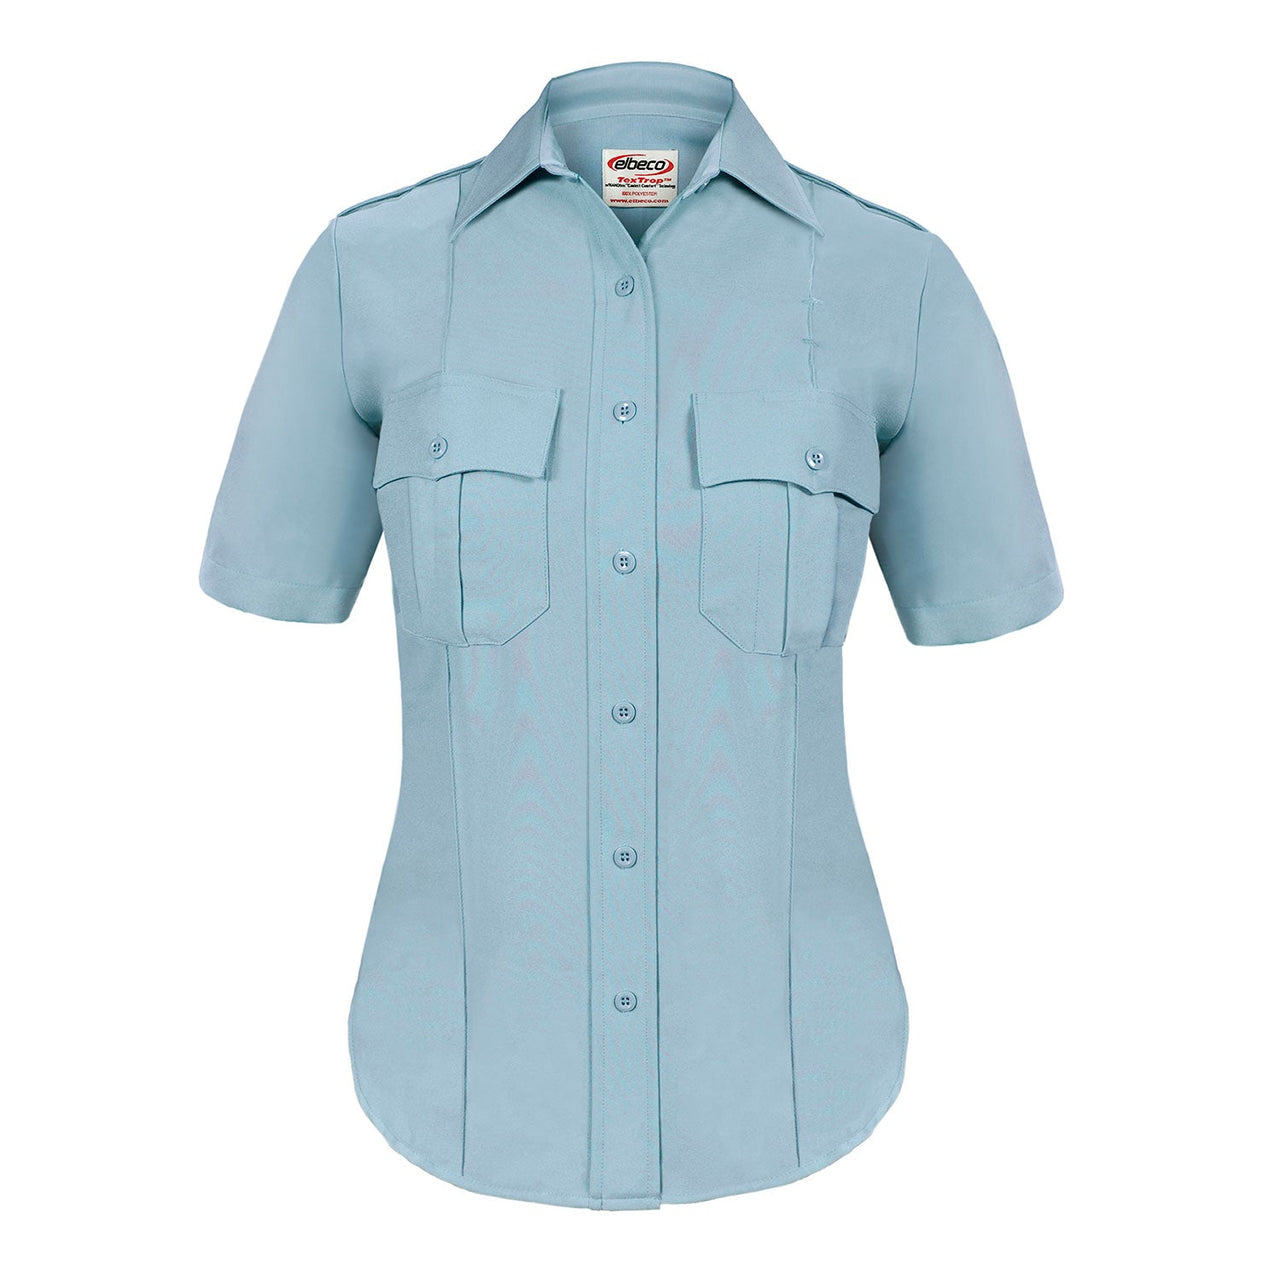 the Firewoman Police Public Safety | TexTrop2 Short Sleeve Women's Uniform Shirt | French Blue Moisture Wicking Police Duty Shirt for Women has patch pockets and a starched collar